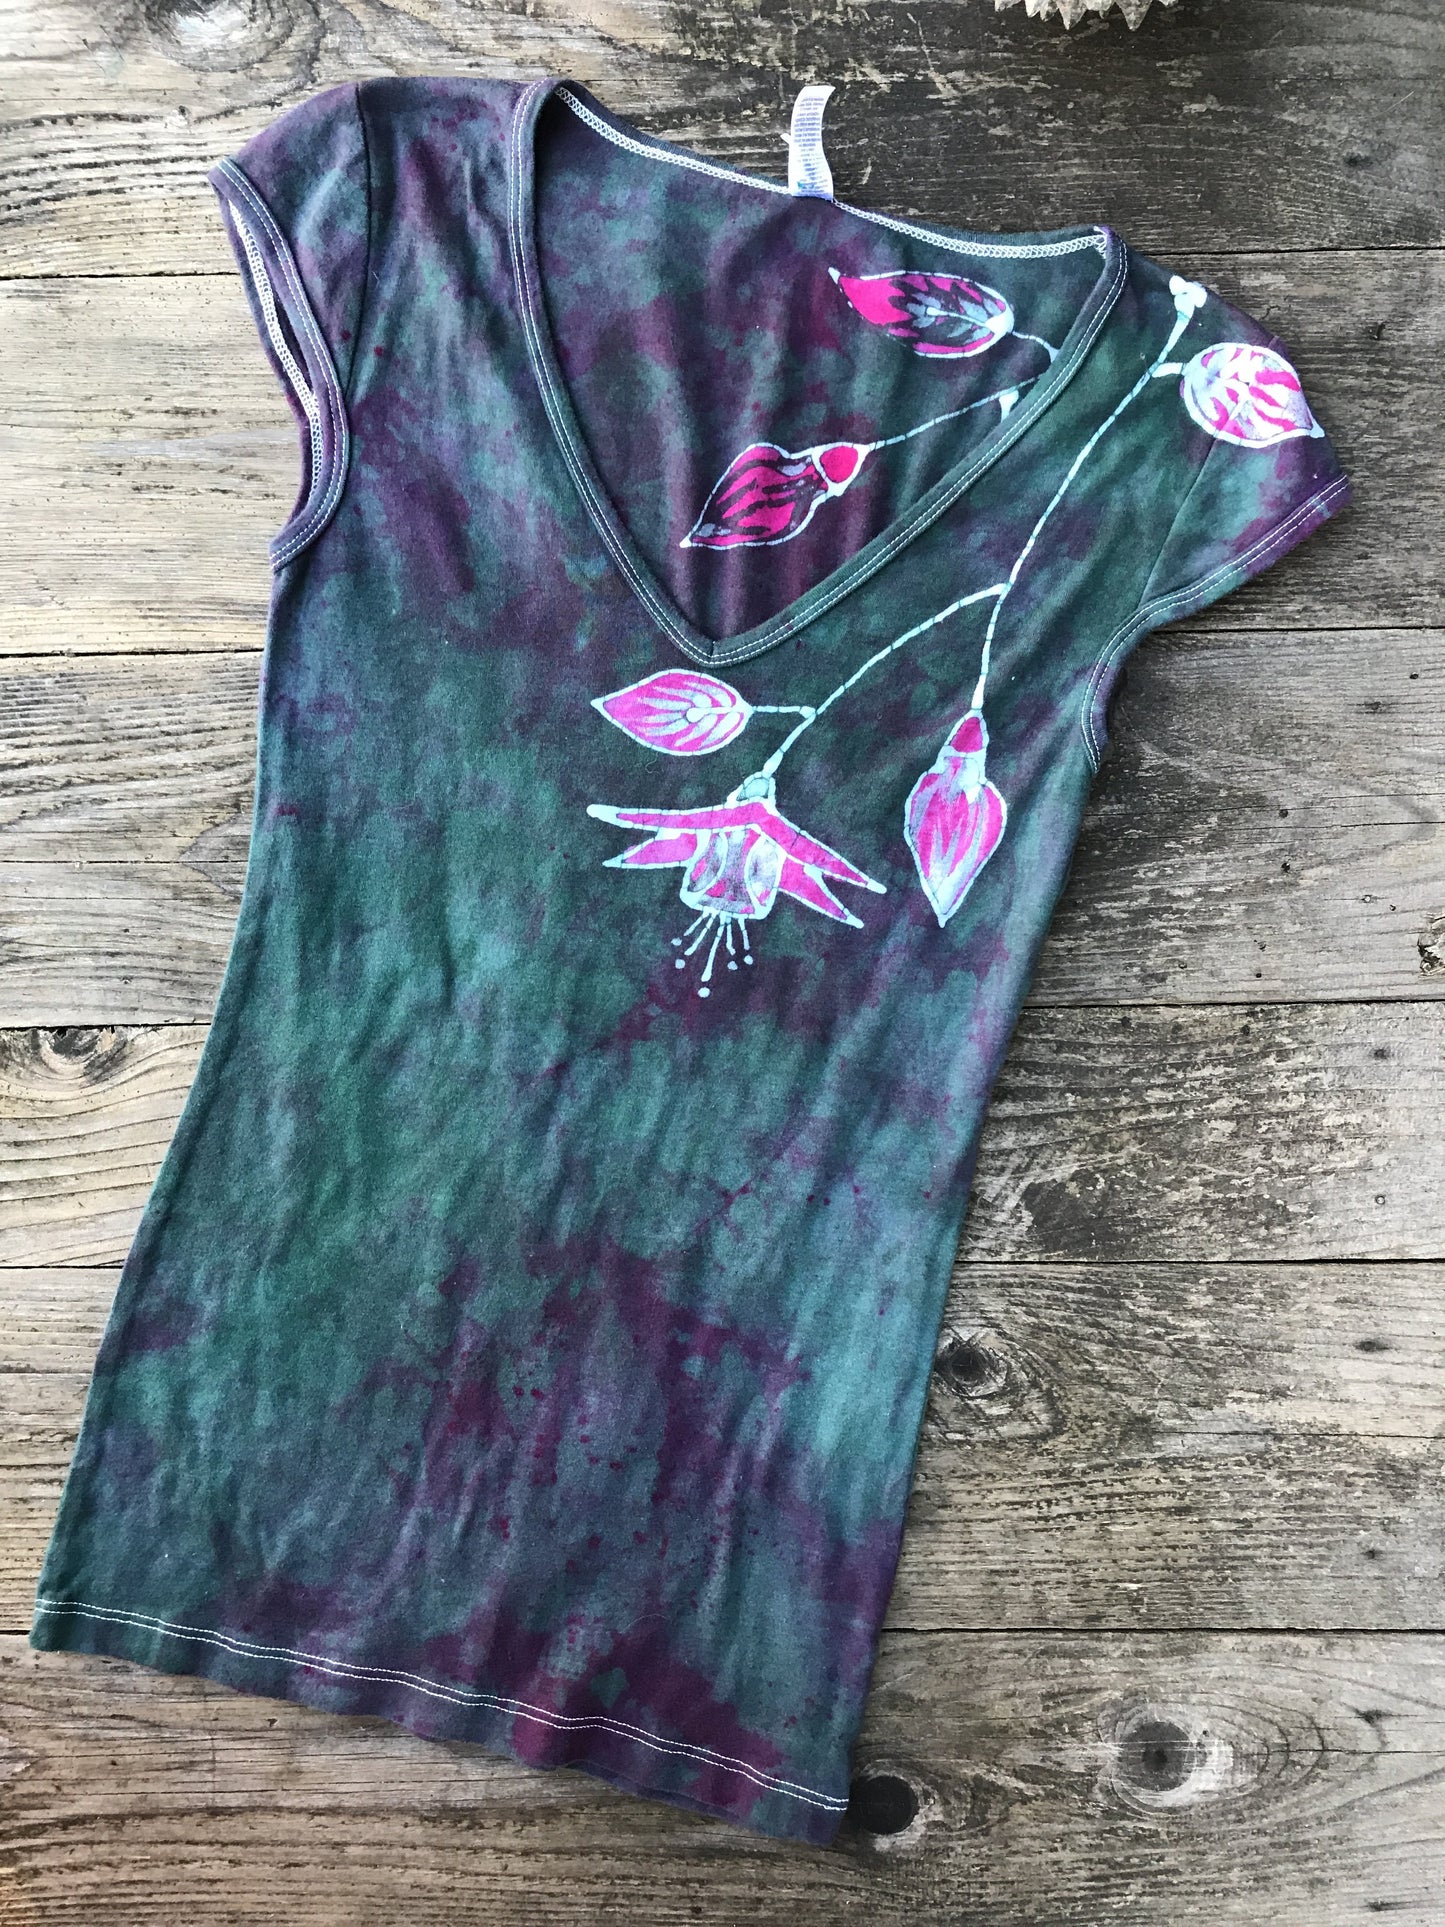 Fuchsias Are Beautiful And Bring Life Hand Painted Batik Stretchy Tee